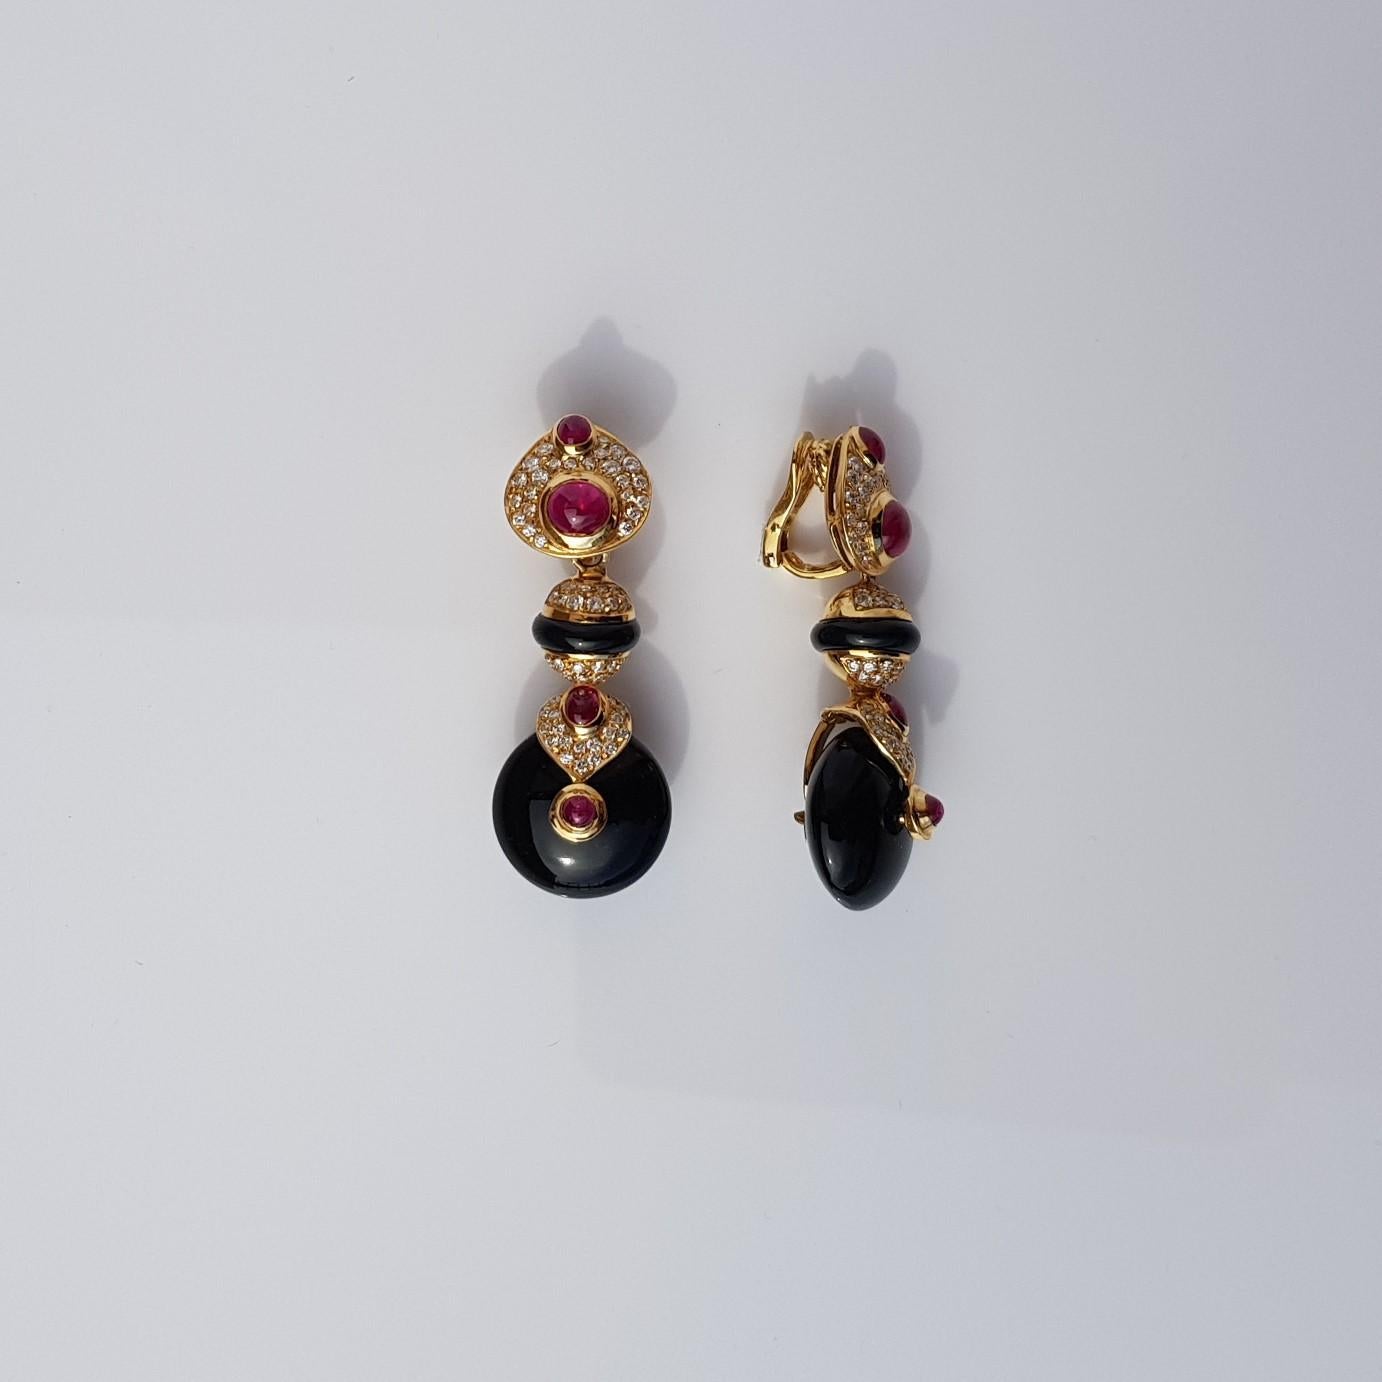 The earrings are set in 18KT yellow gold  embellished by 1.90 carats of diamonds, 4.50 carats of rubies and by 3.18 grams of onyx